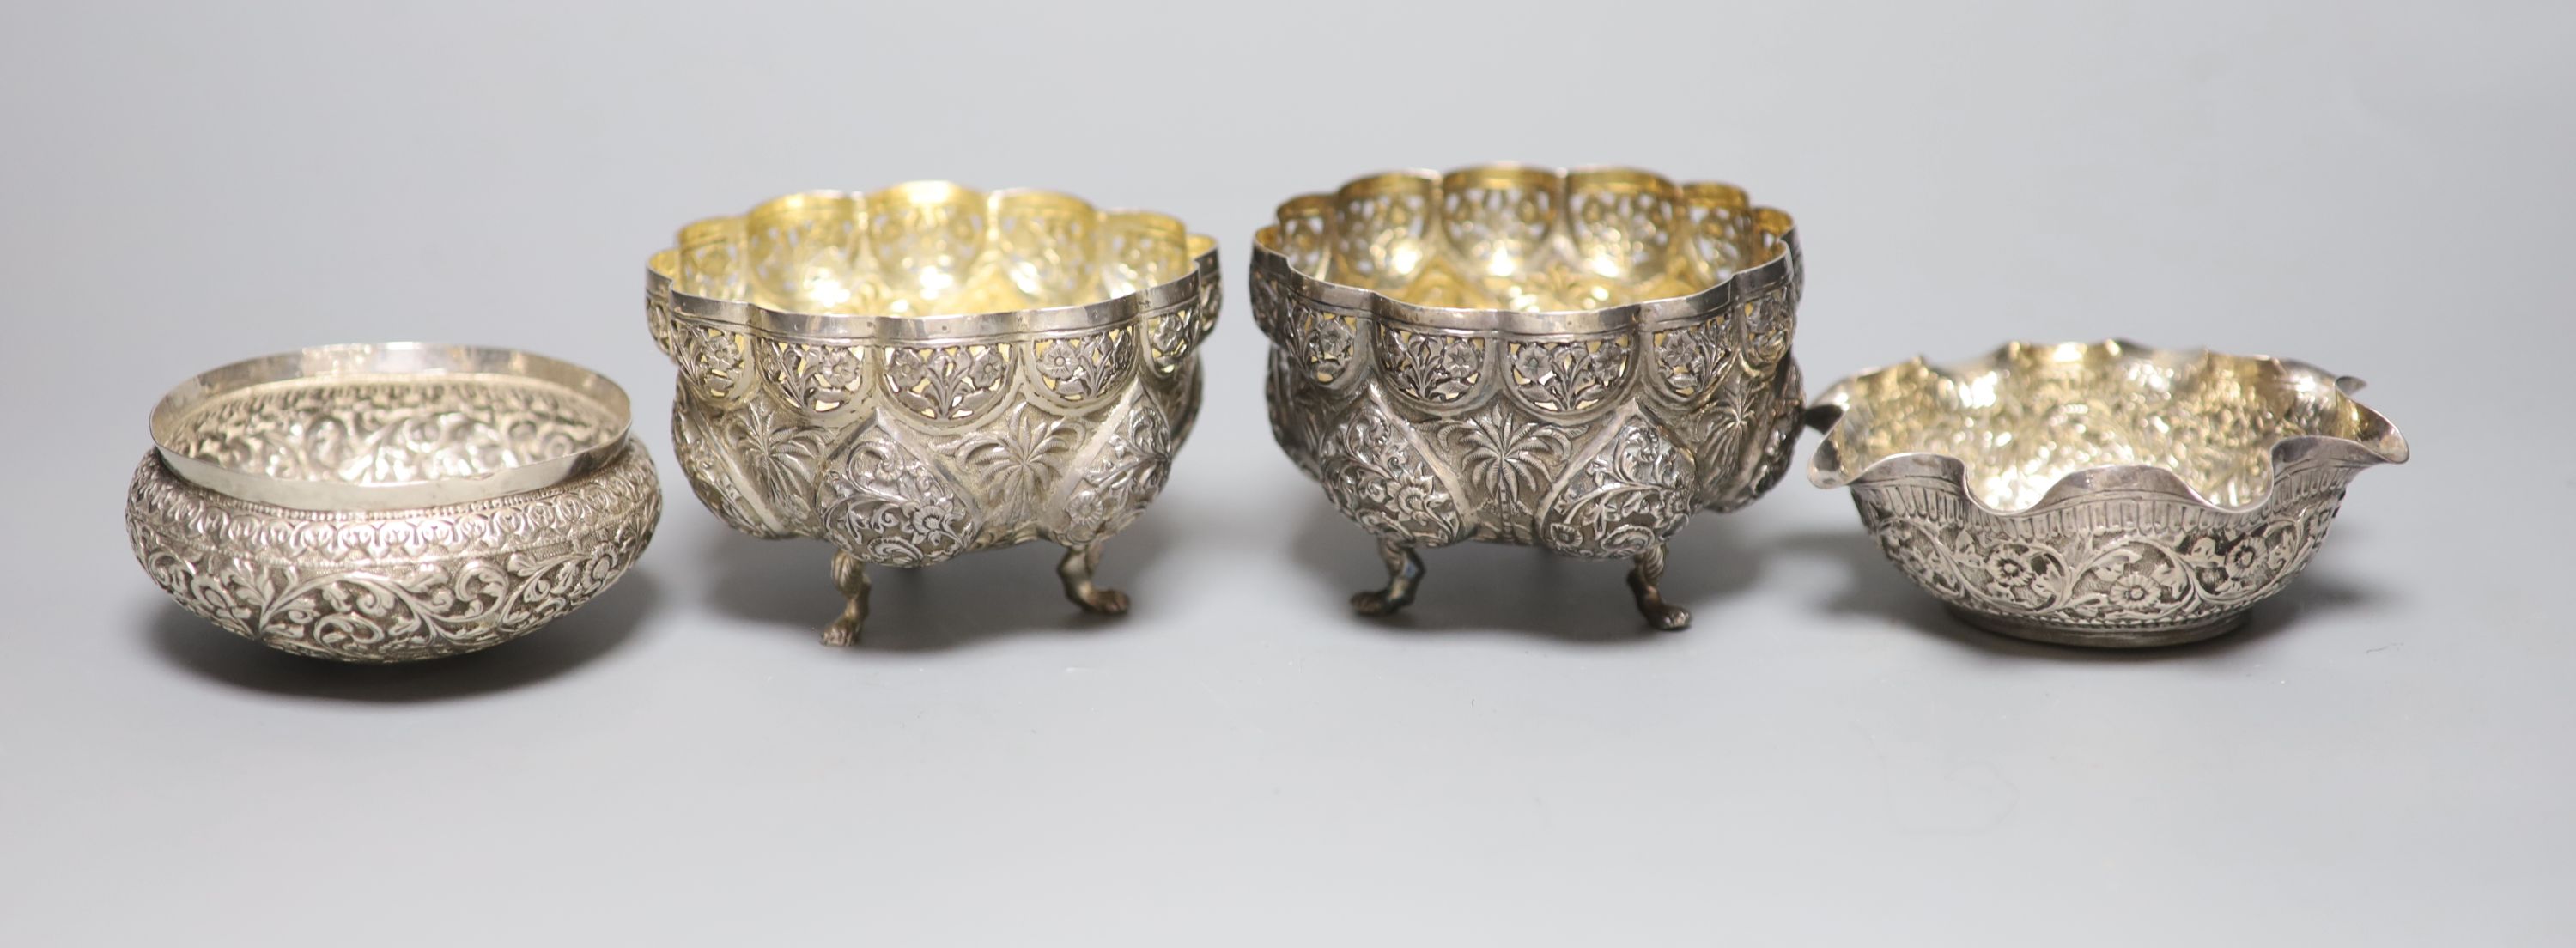 A pair of Indian white metal bowls, diameter 96mm and two similar bowls